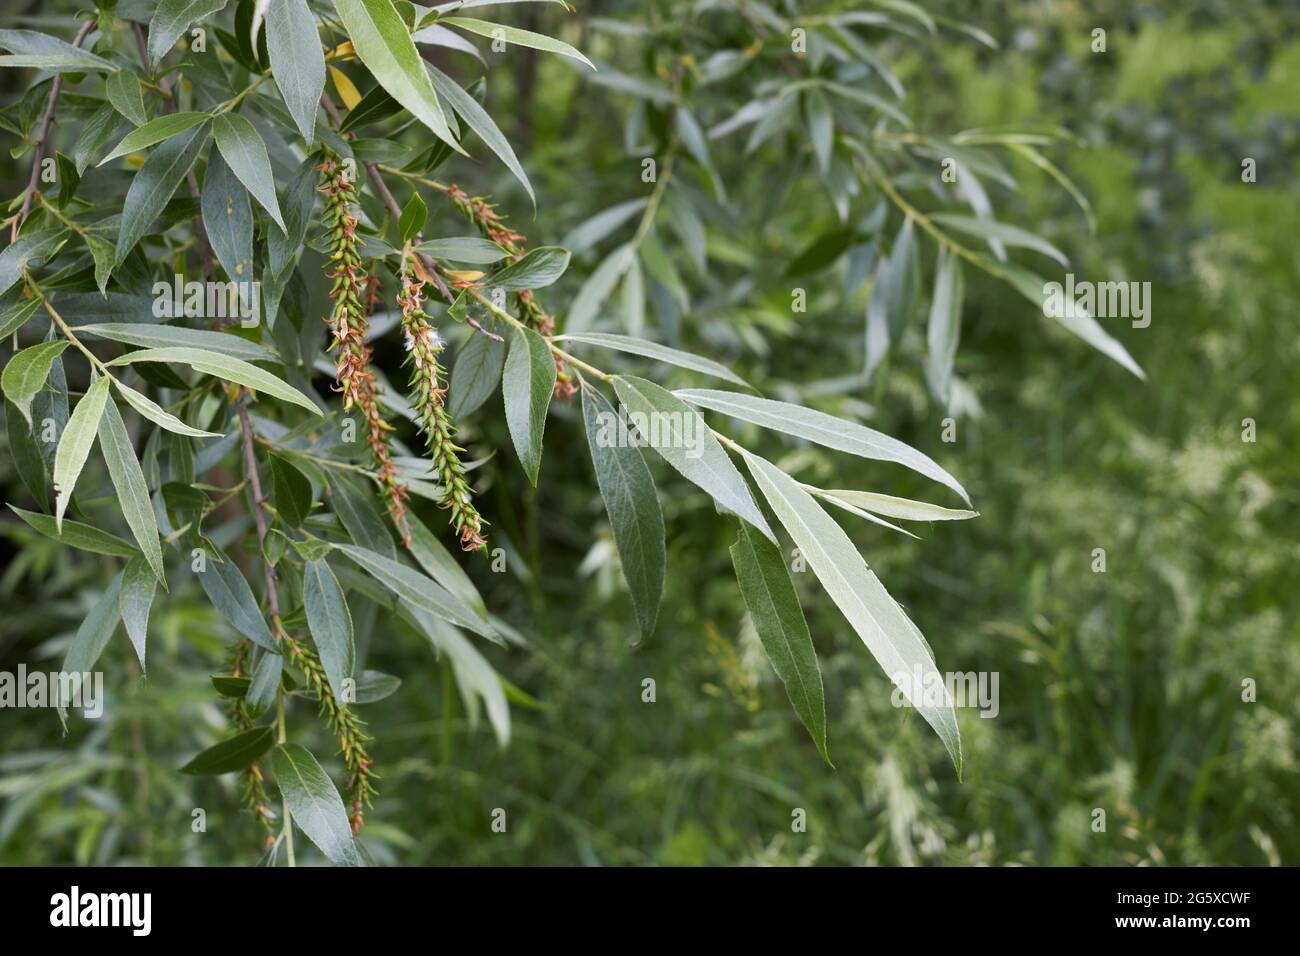 Salix alba branch and trunk close up Stock Photo